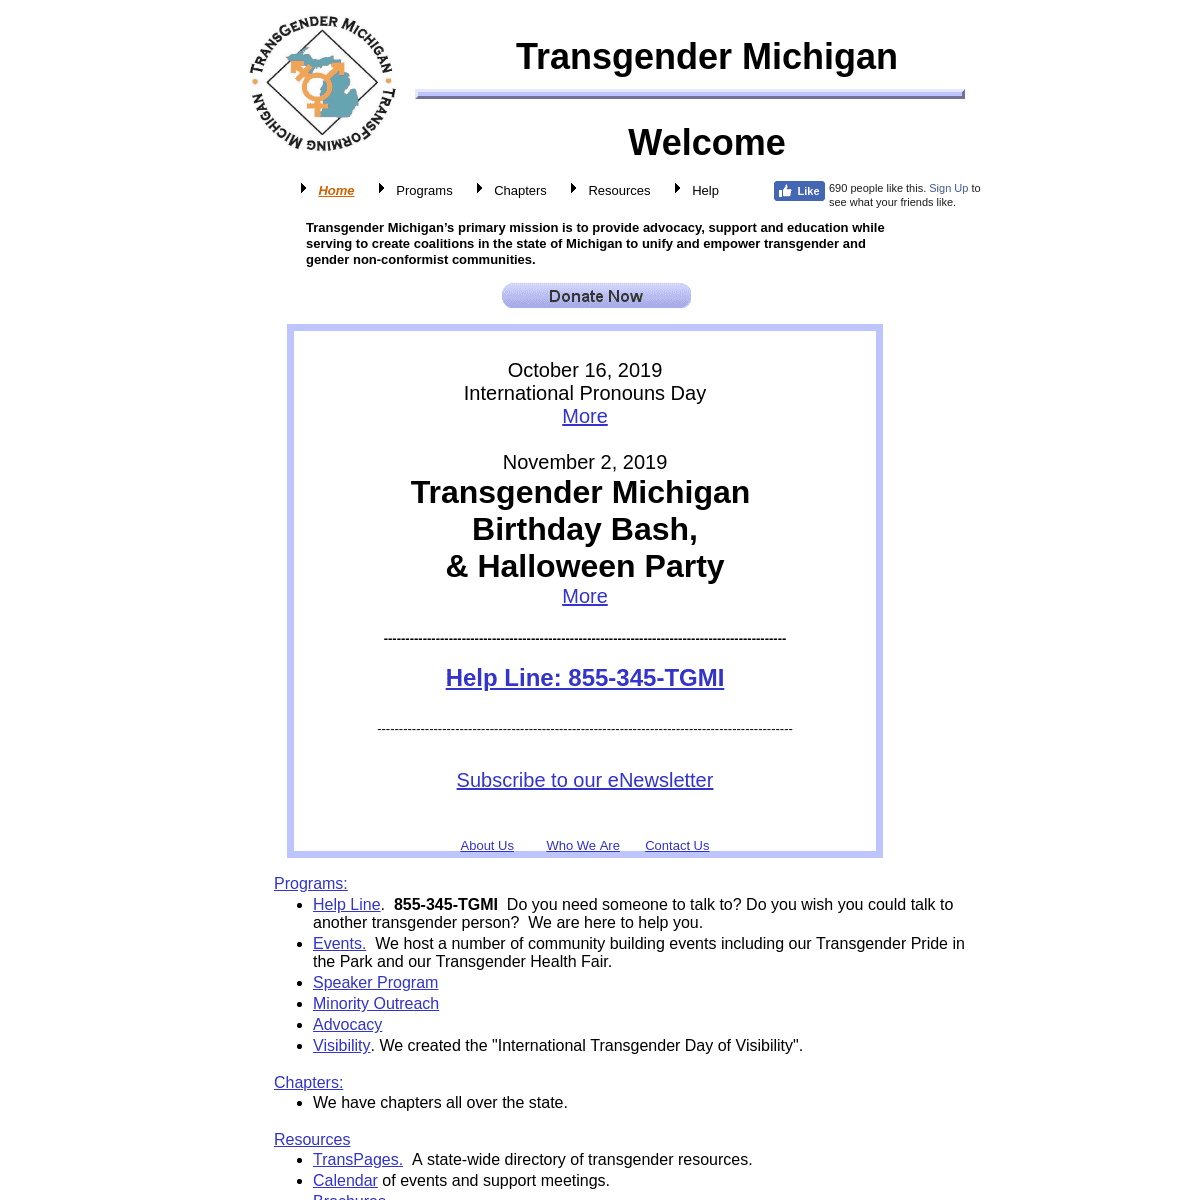 A complete backup of transgendermichigan.org